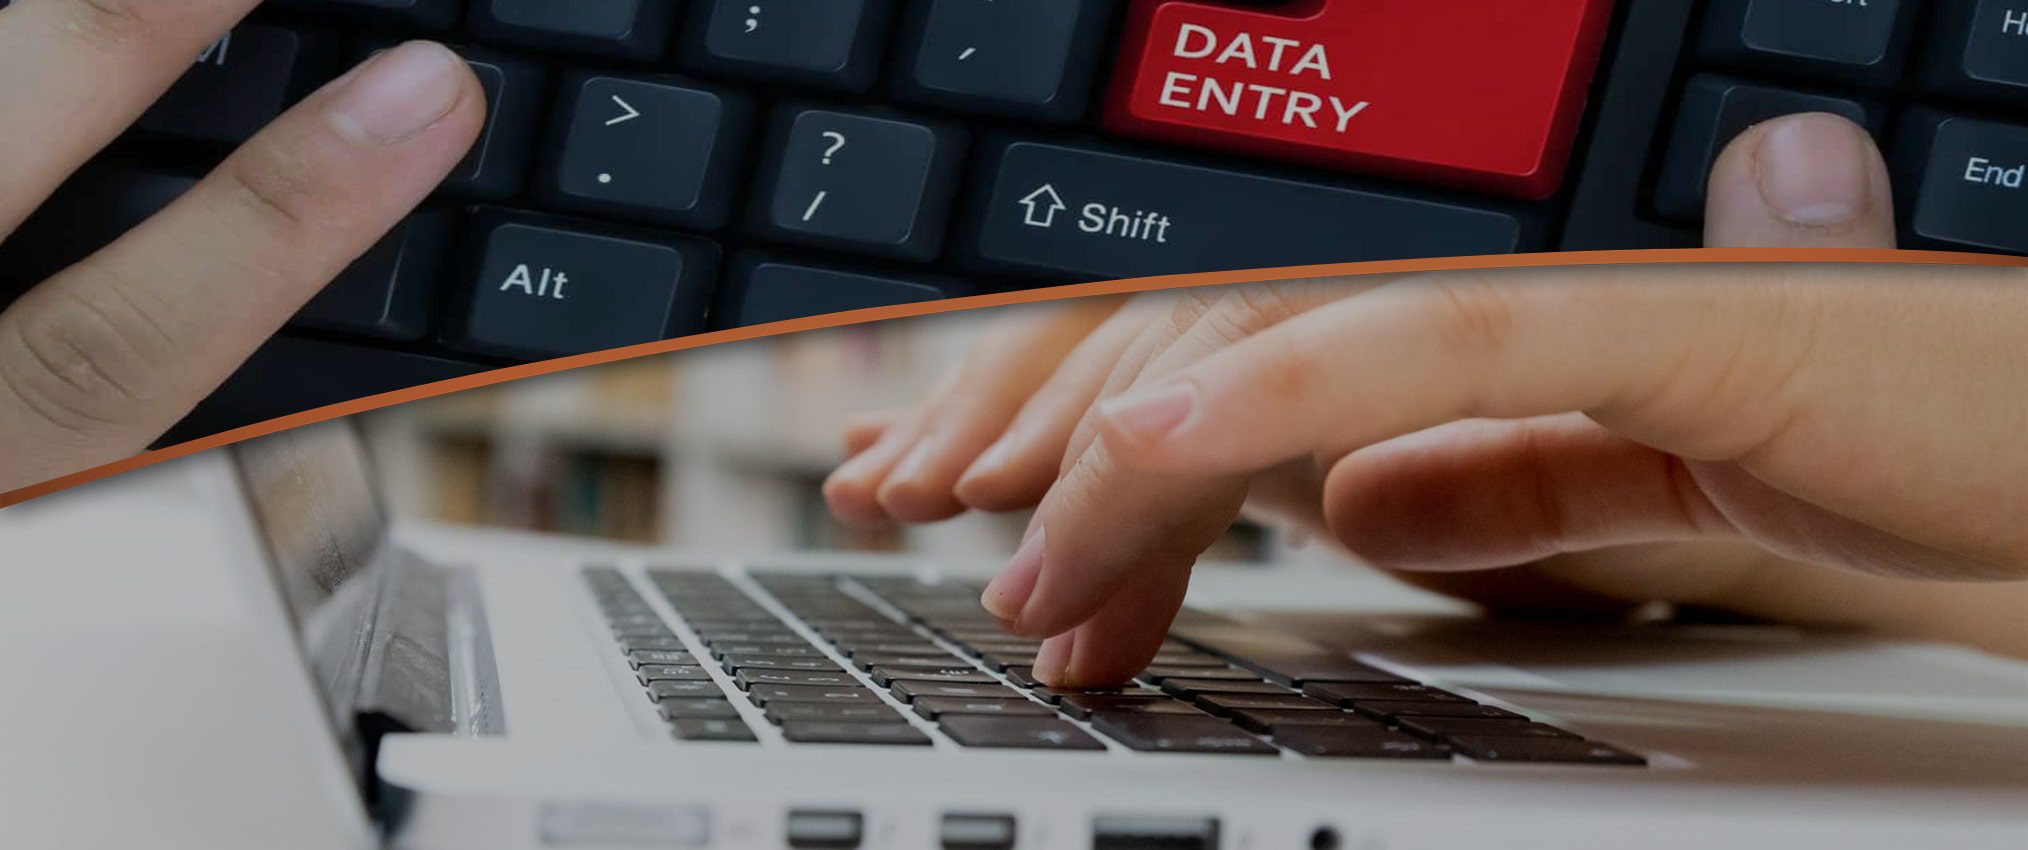 5 Common Data Entry Challenges Faced by Every Organization